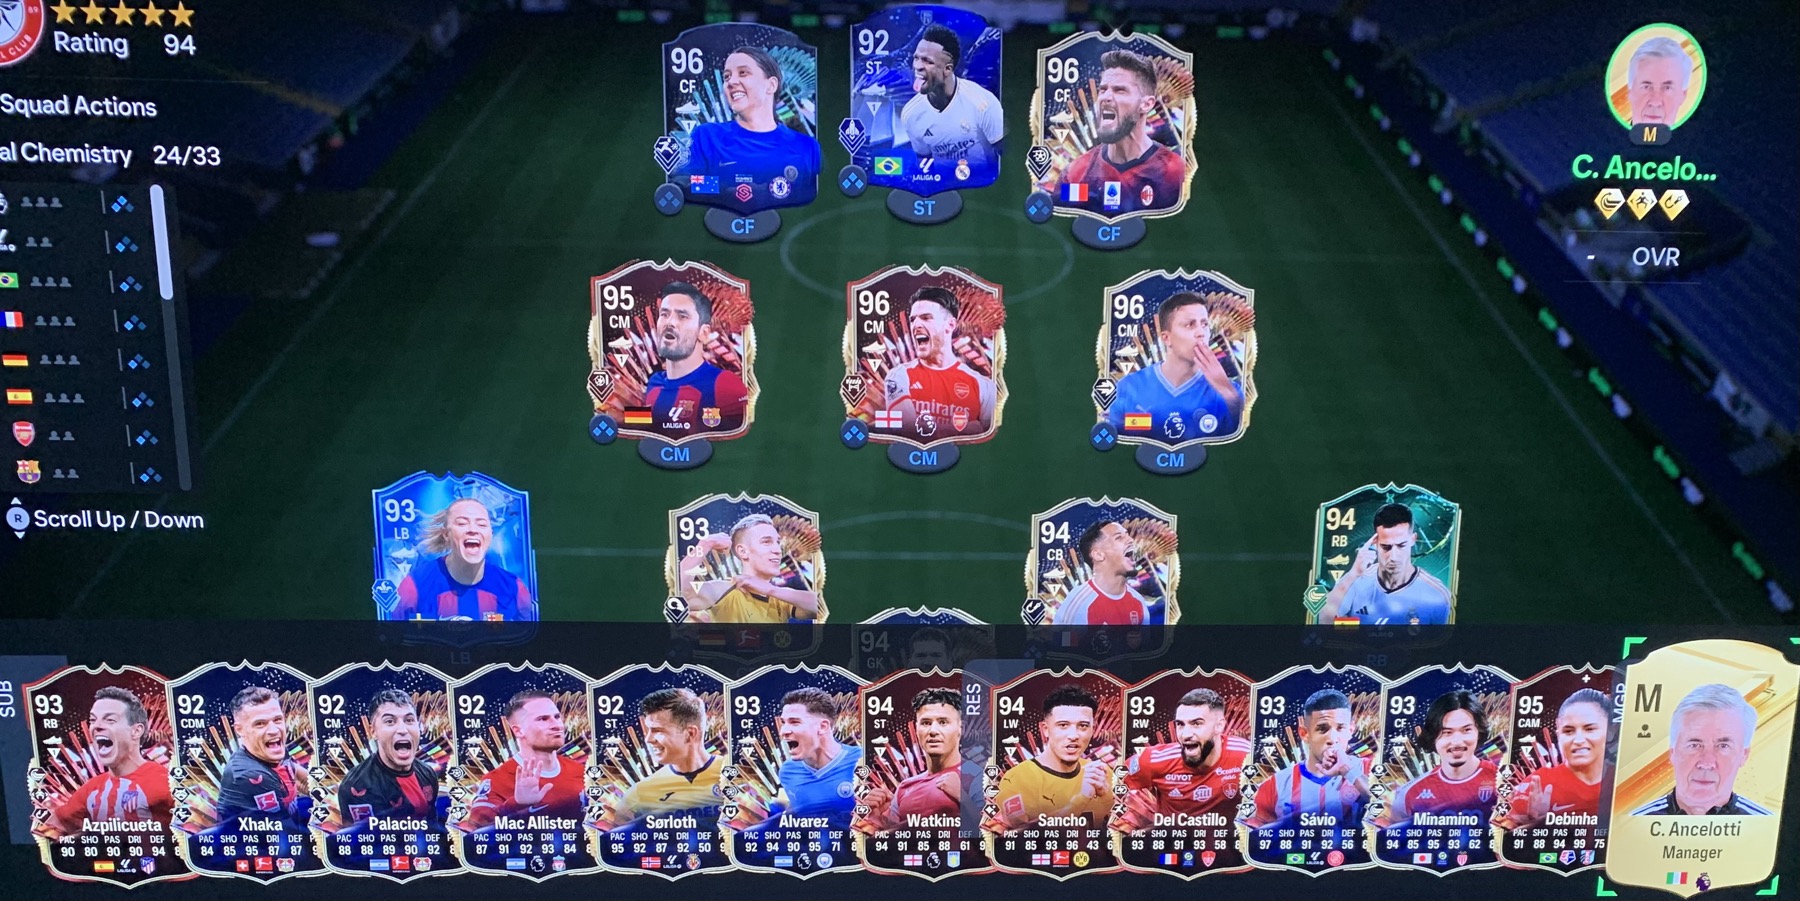 More 1375 difference packs + 1 400 000 + META SQUAD + Game + a lot of TOTS cards + various special cards + fodder